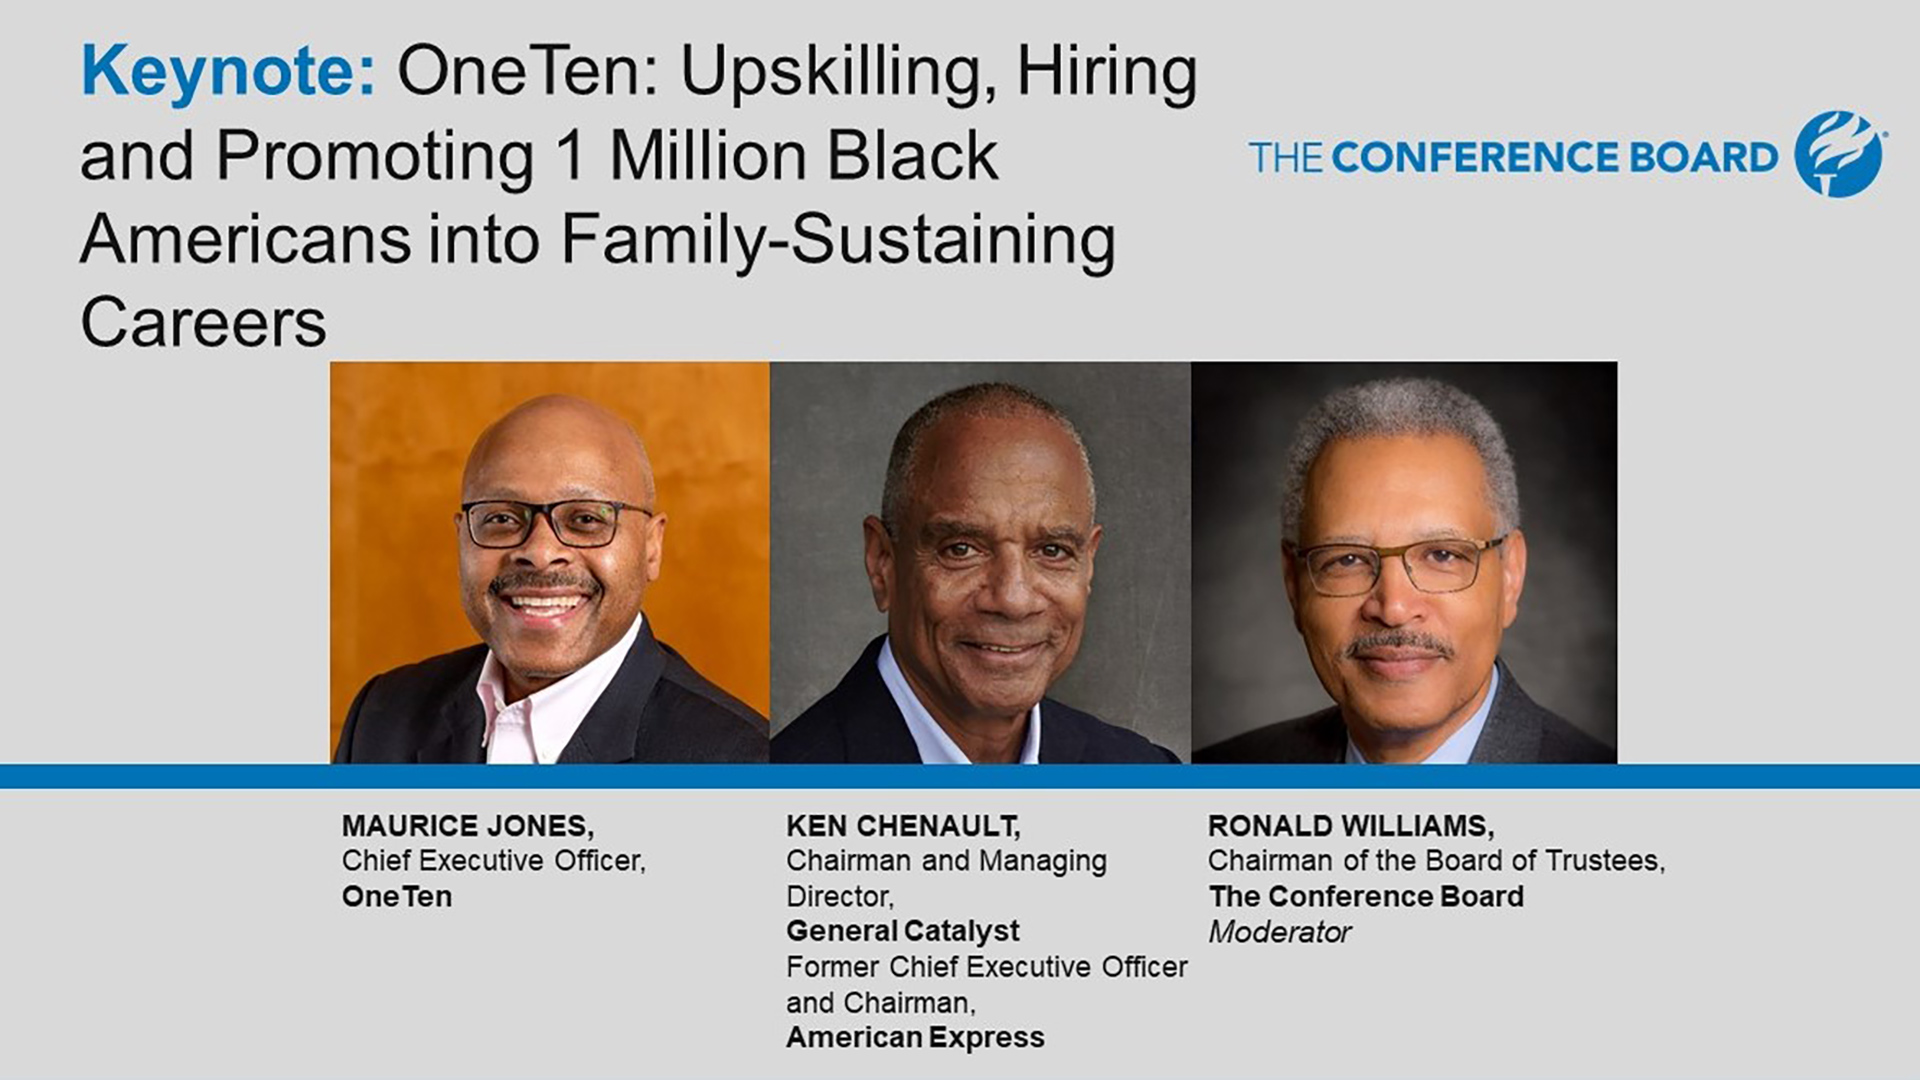 Building a More Civil & Just Society: Session L: Upskilling, Hiring and Promoting 1 Million Black Americans into Family-Sustaining Careers. 30 Mins